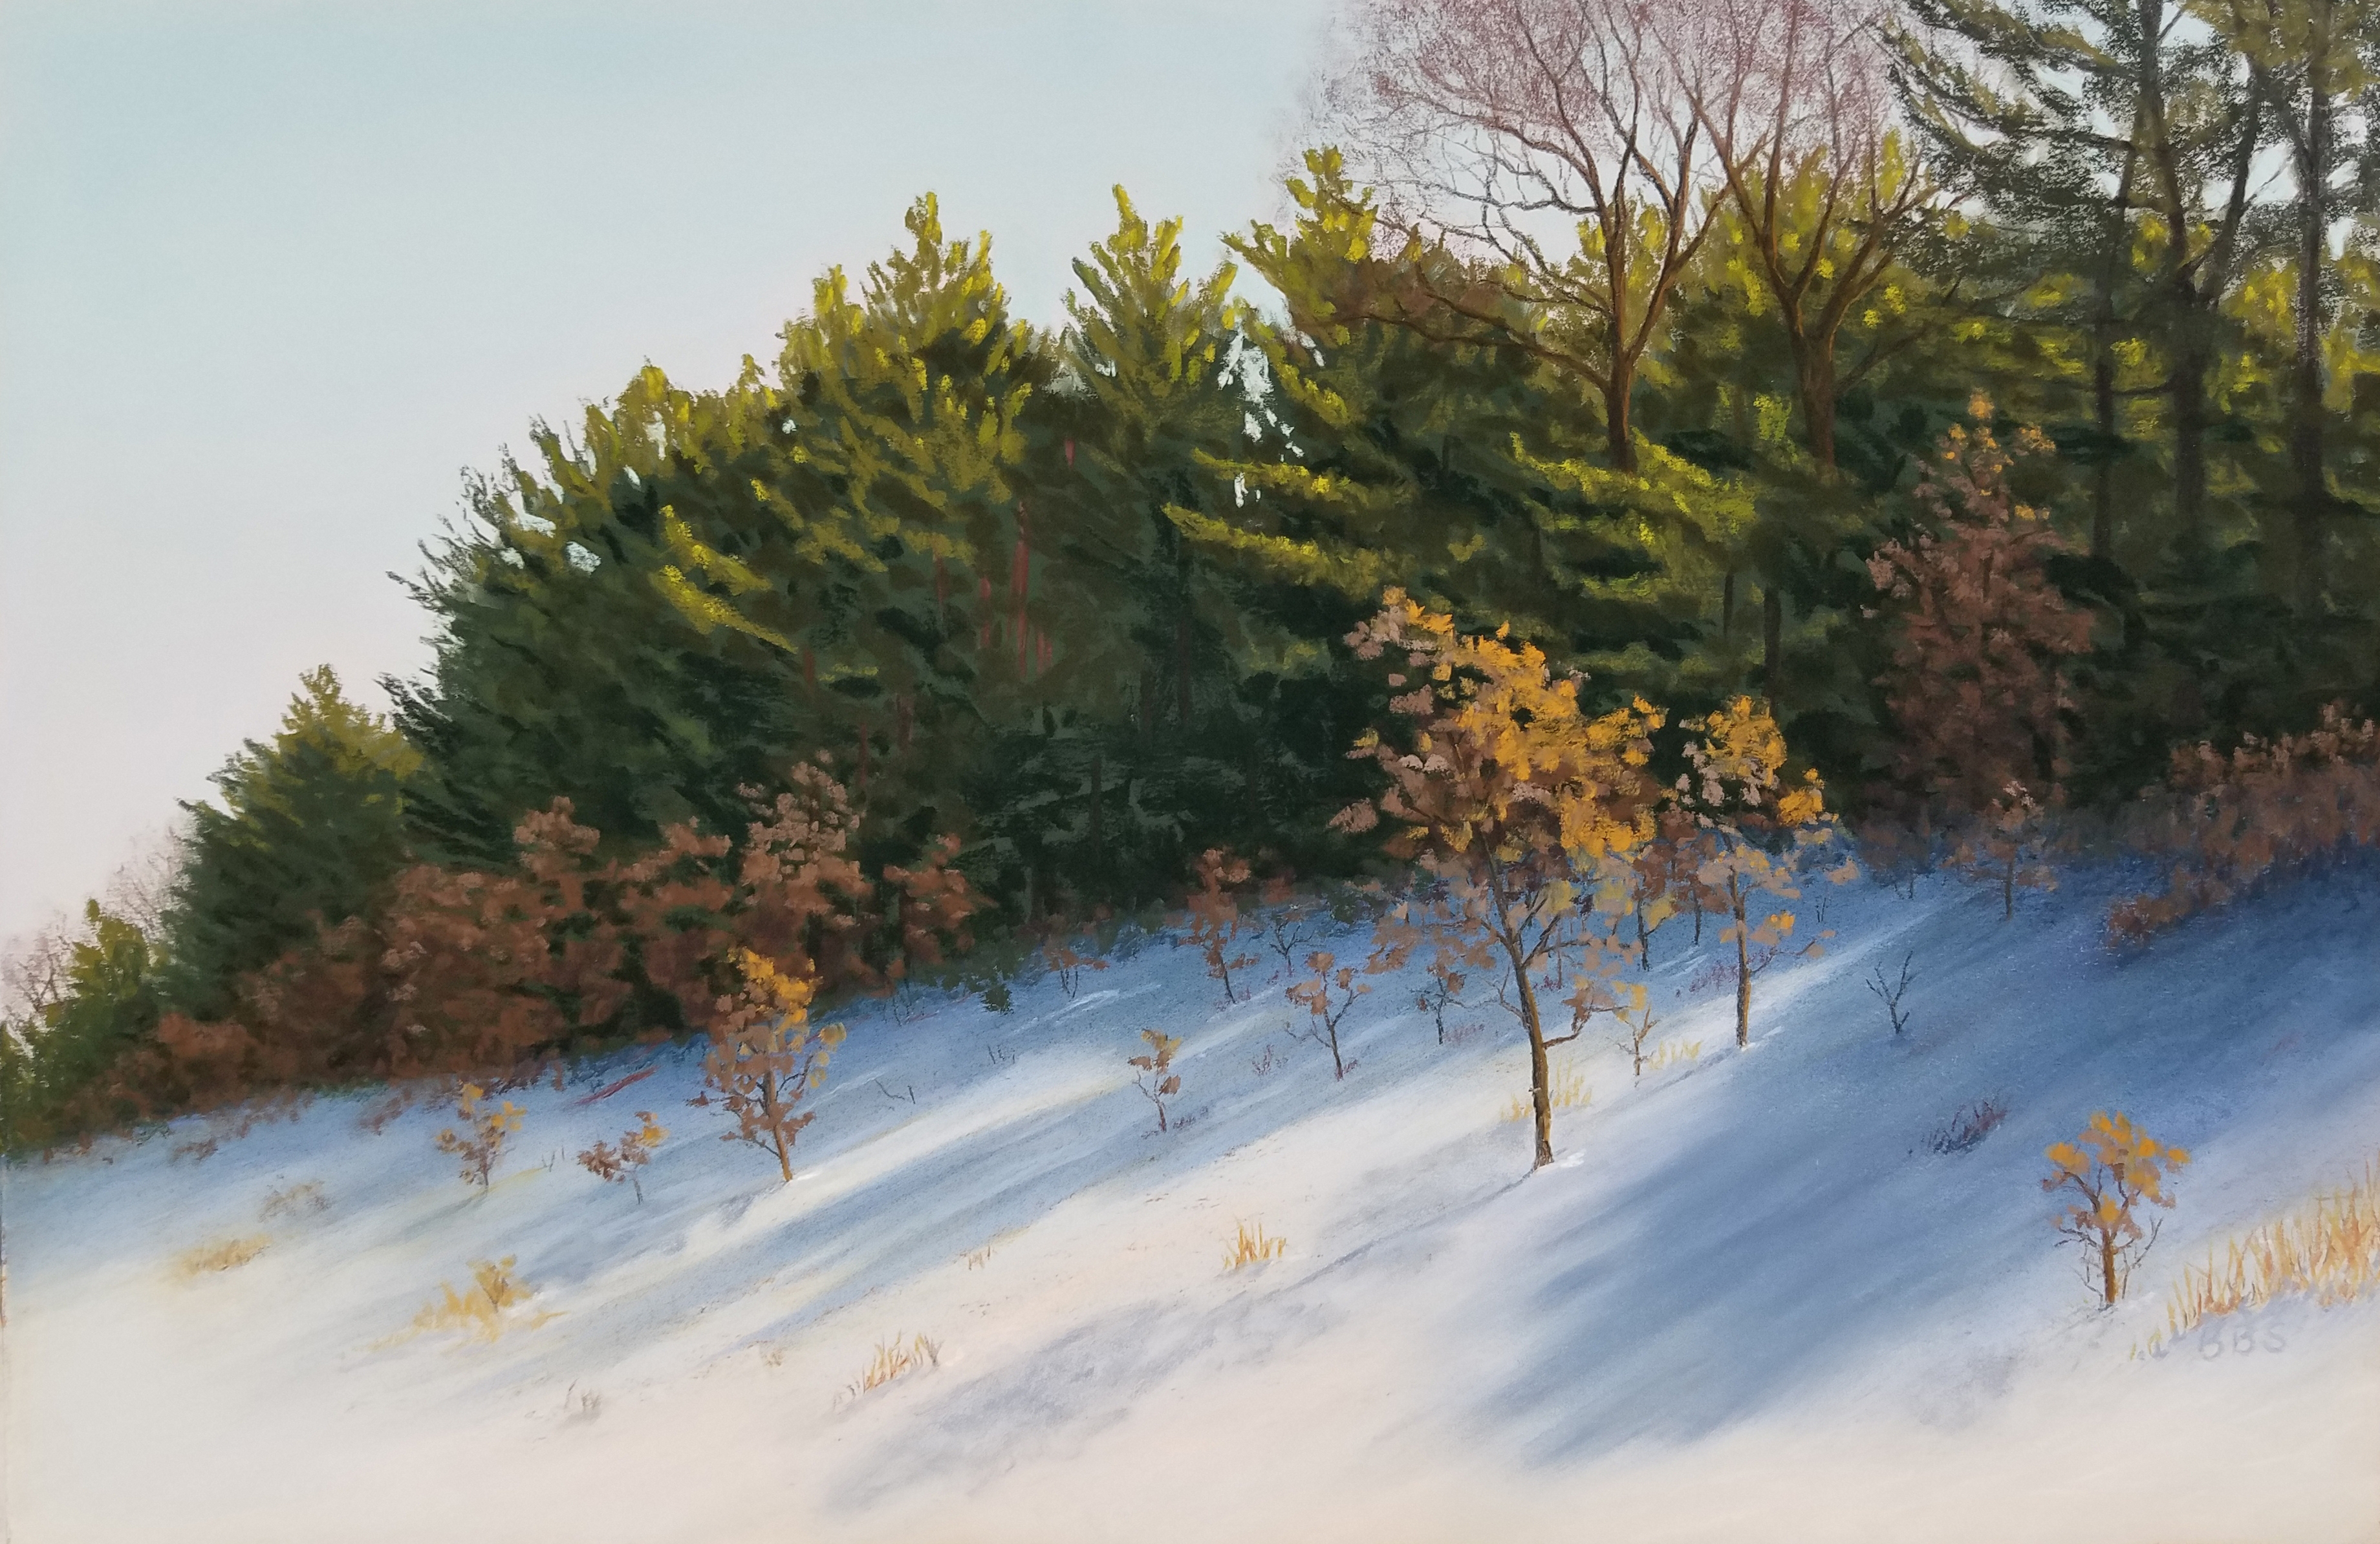 drawing of snow covered hillside with different kinds of decidious and coniferous trees, some trees with brown leaves and some leaves